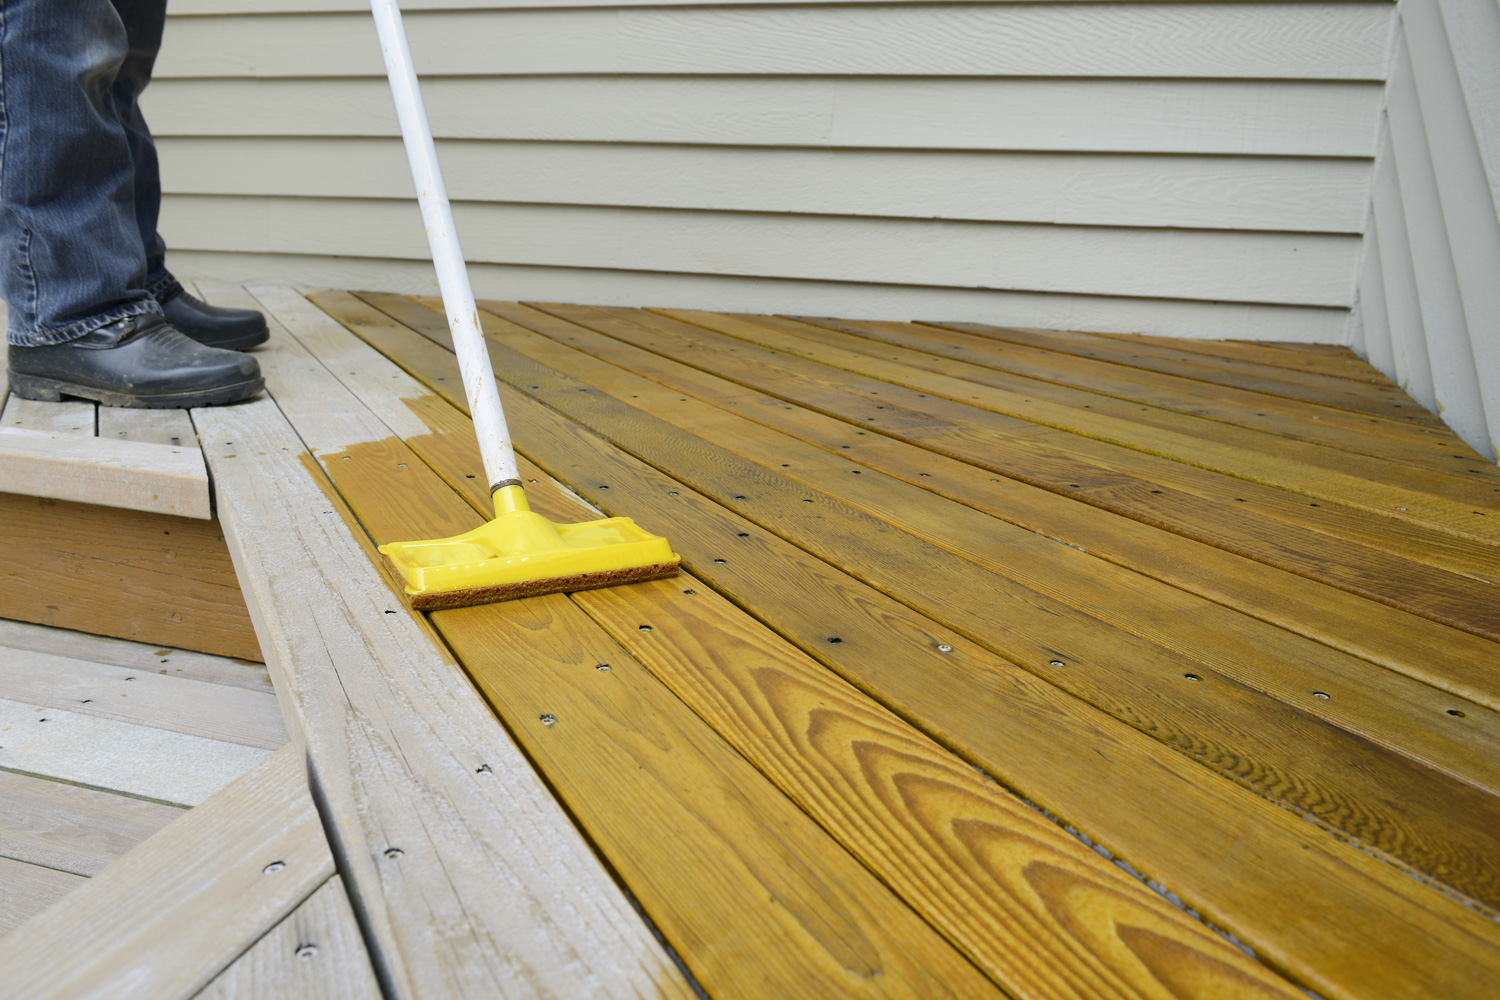 Worker Applying Stain to Deck